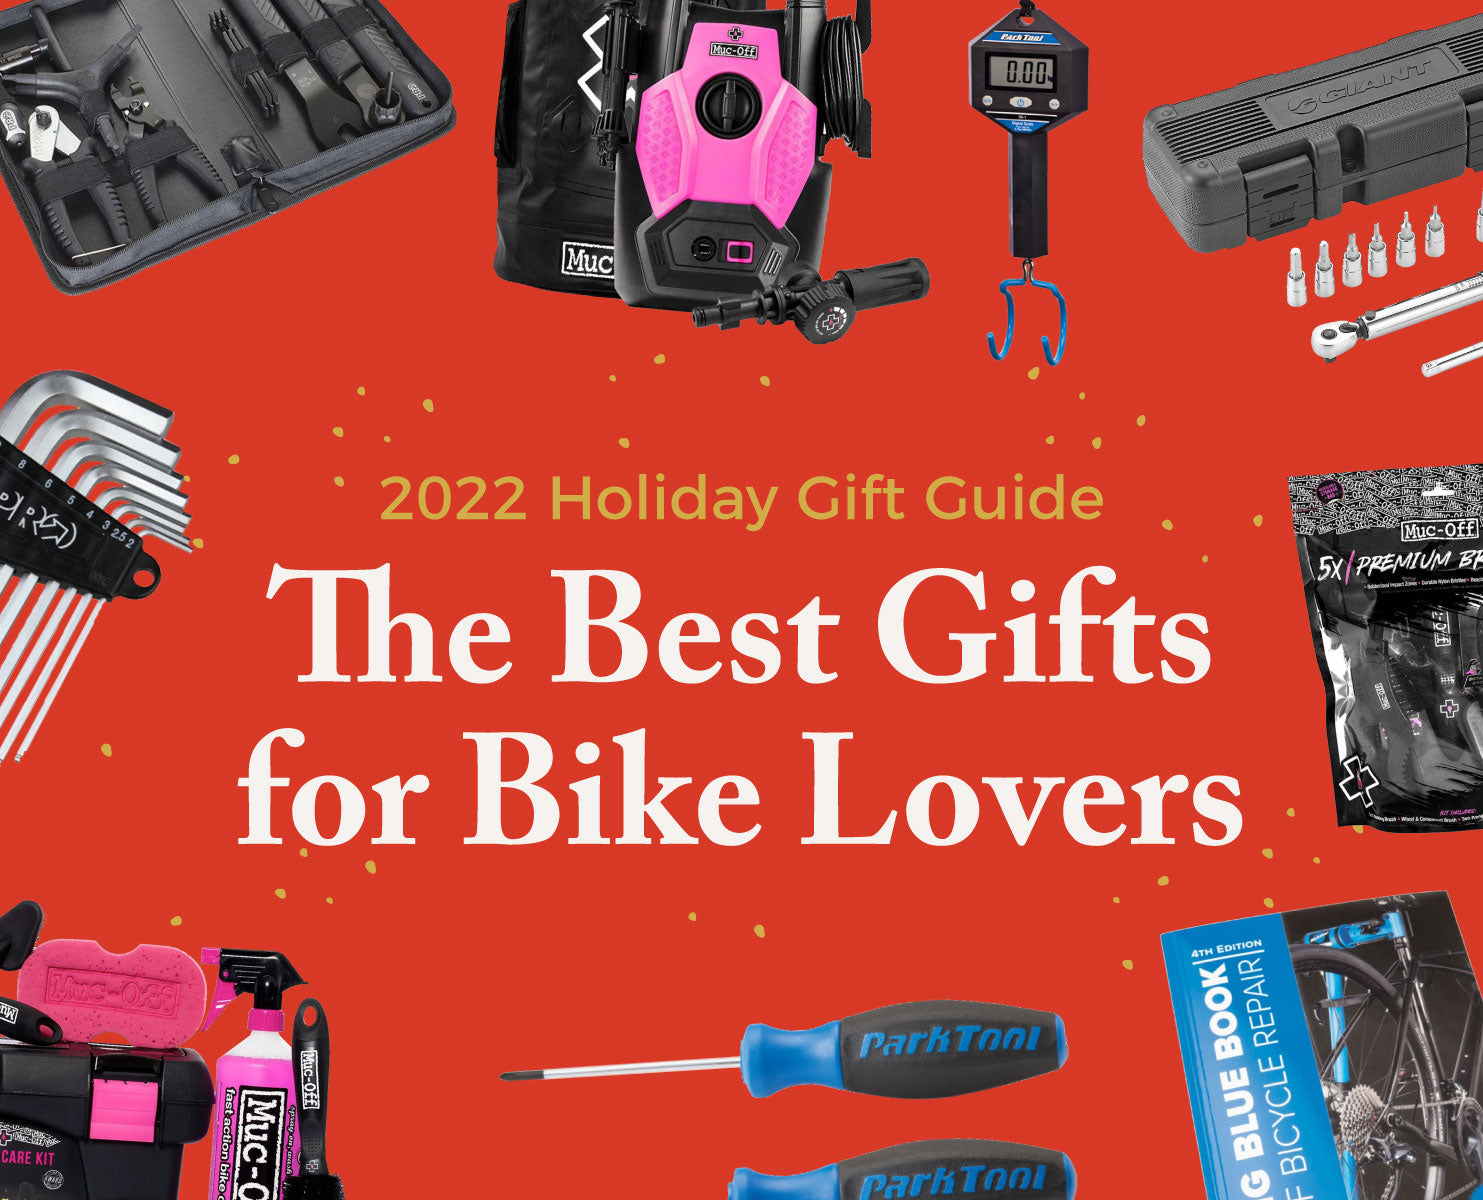 The Best Gifts for Bike Lovers